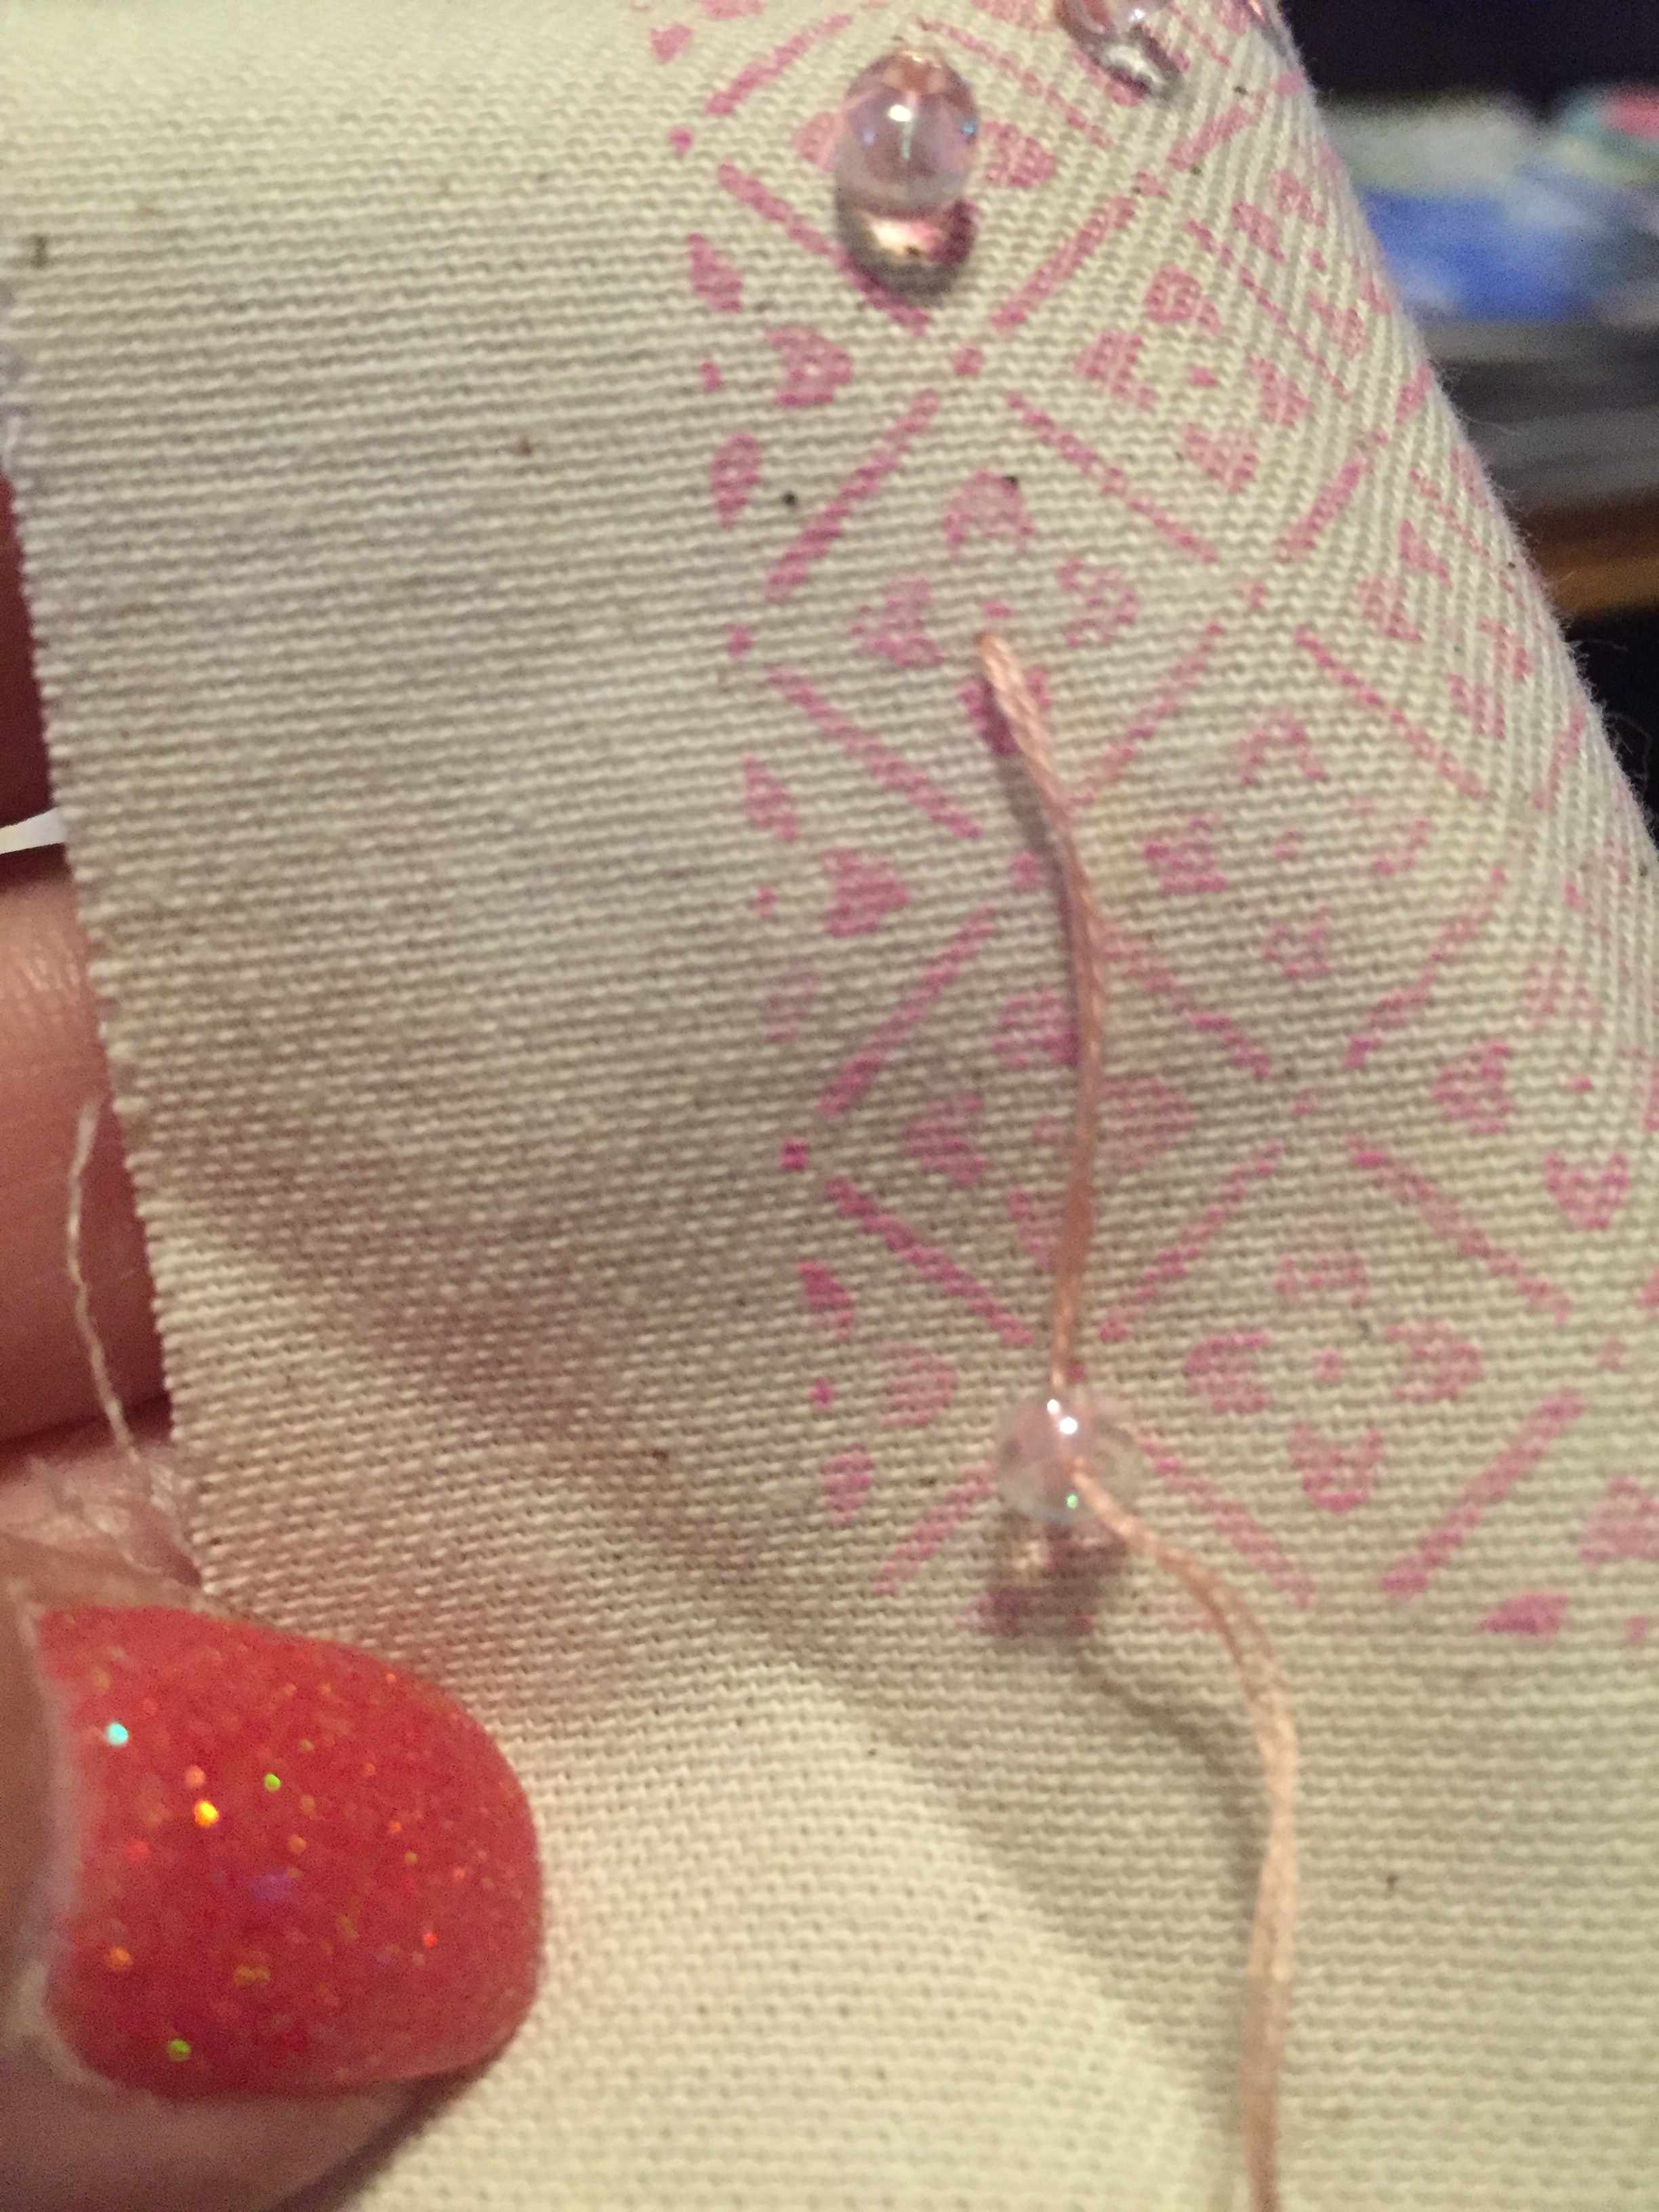 Stamped and Beaded Pretty Little Pincushion